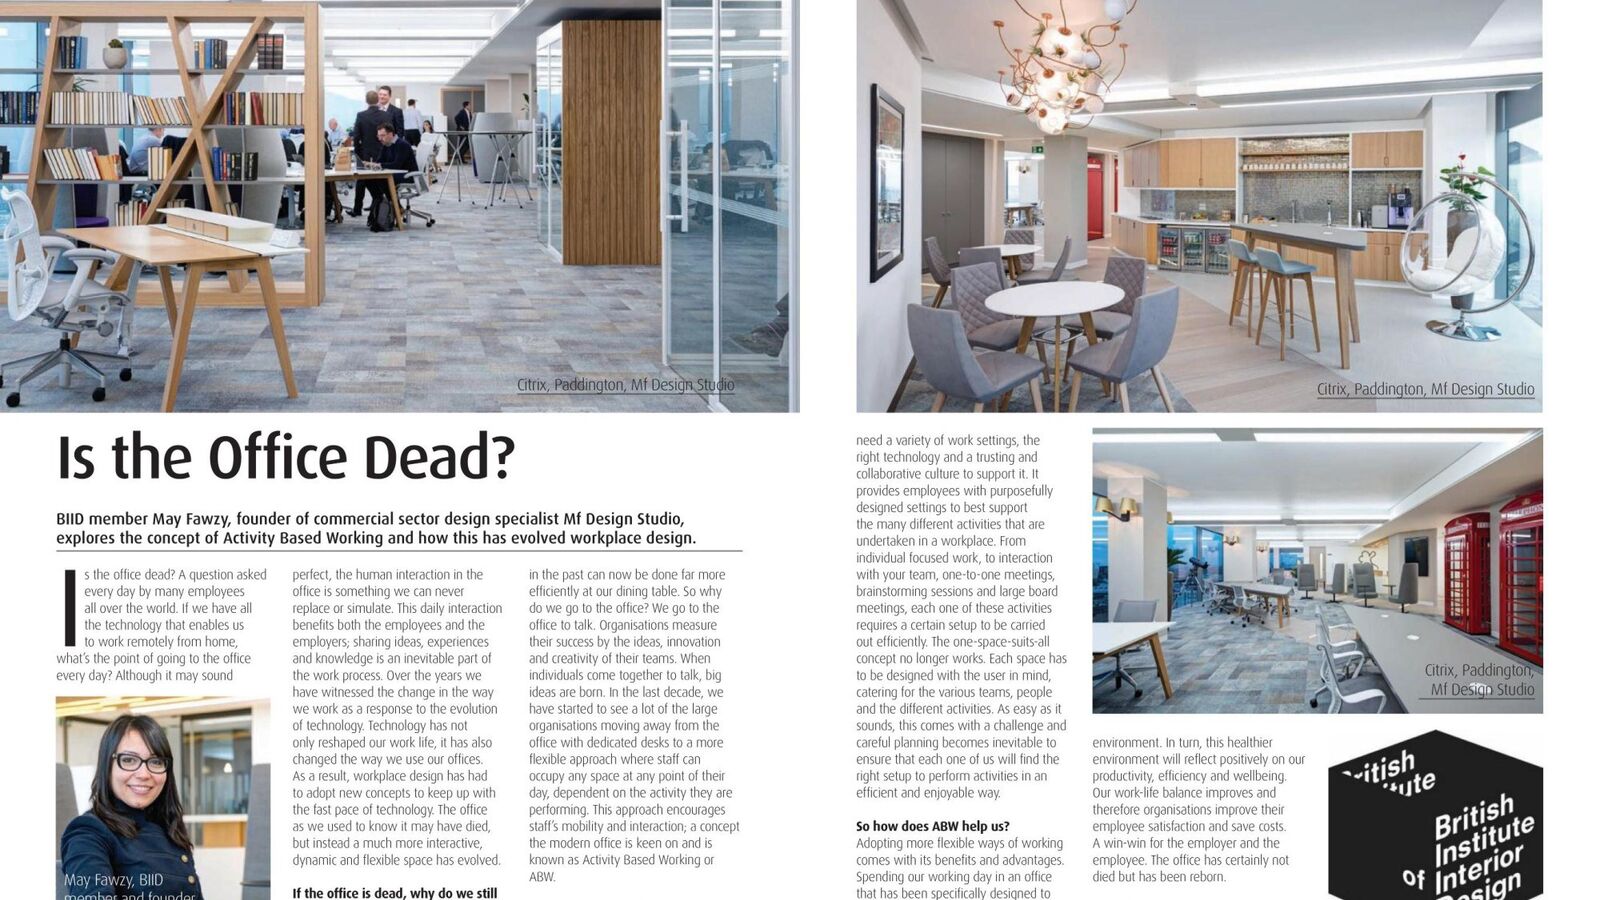 "Is the office dead?" article by May Fawzy in In.Design magazine March 2018 image